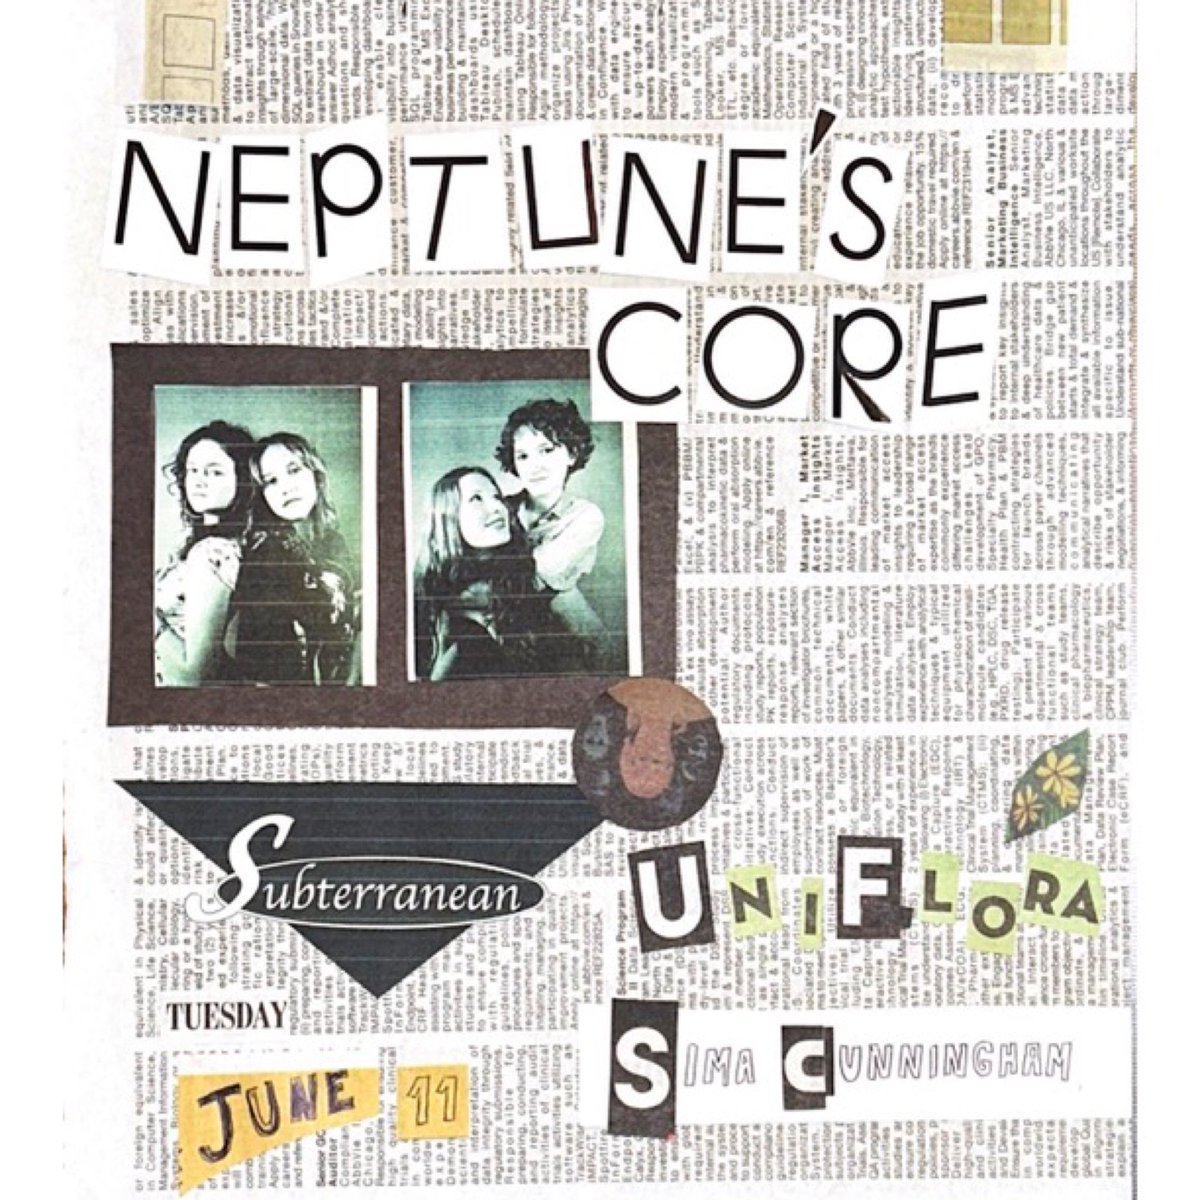 🗞️JUST ANNOUNCED🗞️ NEPTUNE'S CORE w/ Sima Cunningham & Uniflora  Tuesday, June 11 | All Ages  *On sale Fri, May 3 @ 10AM Tickets @ subt.net